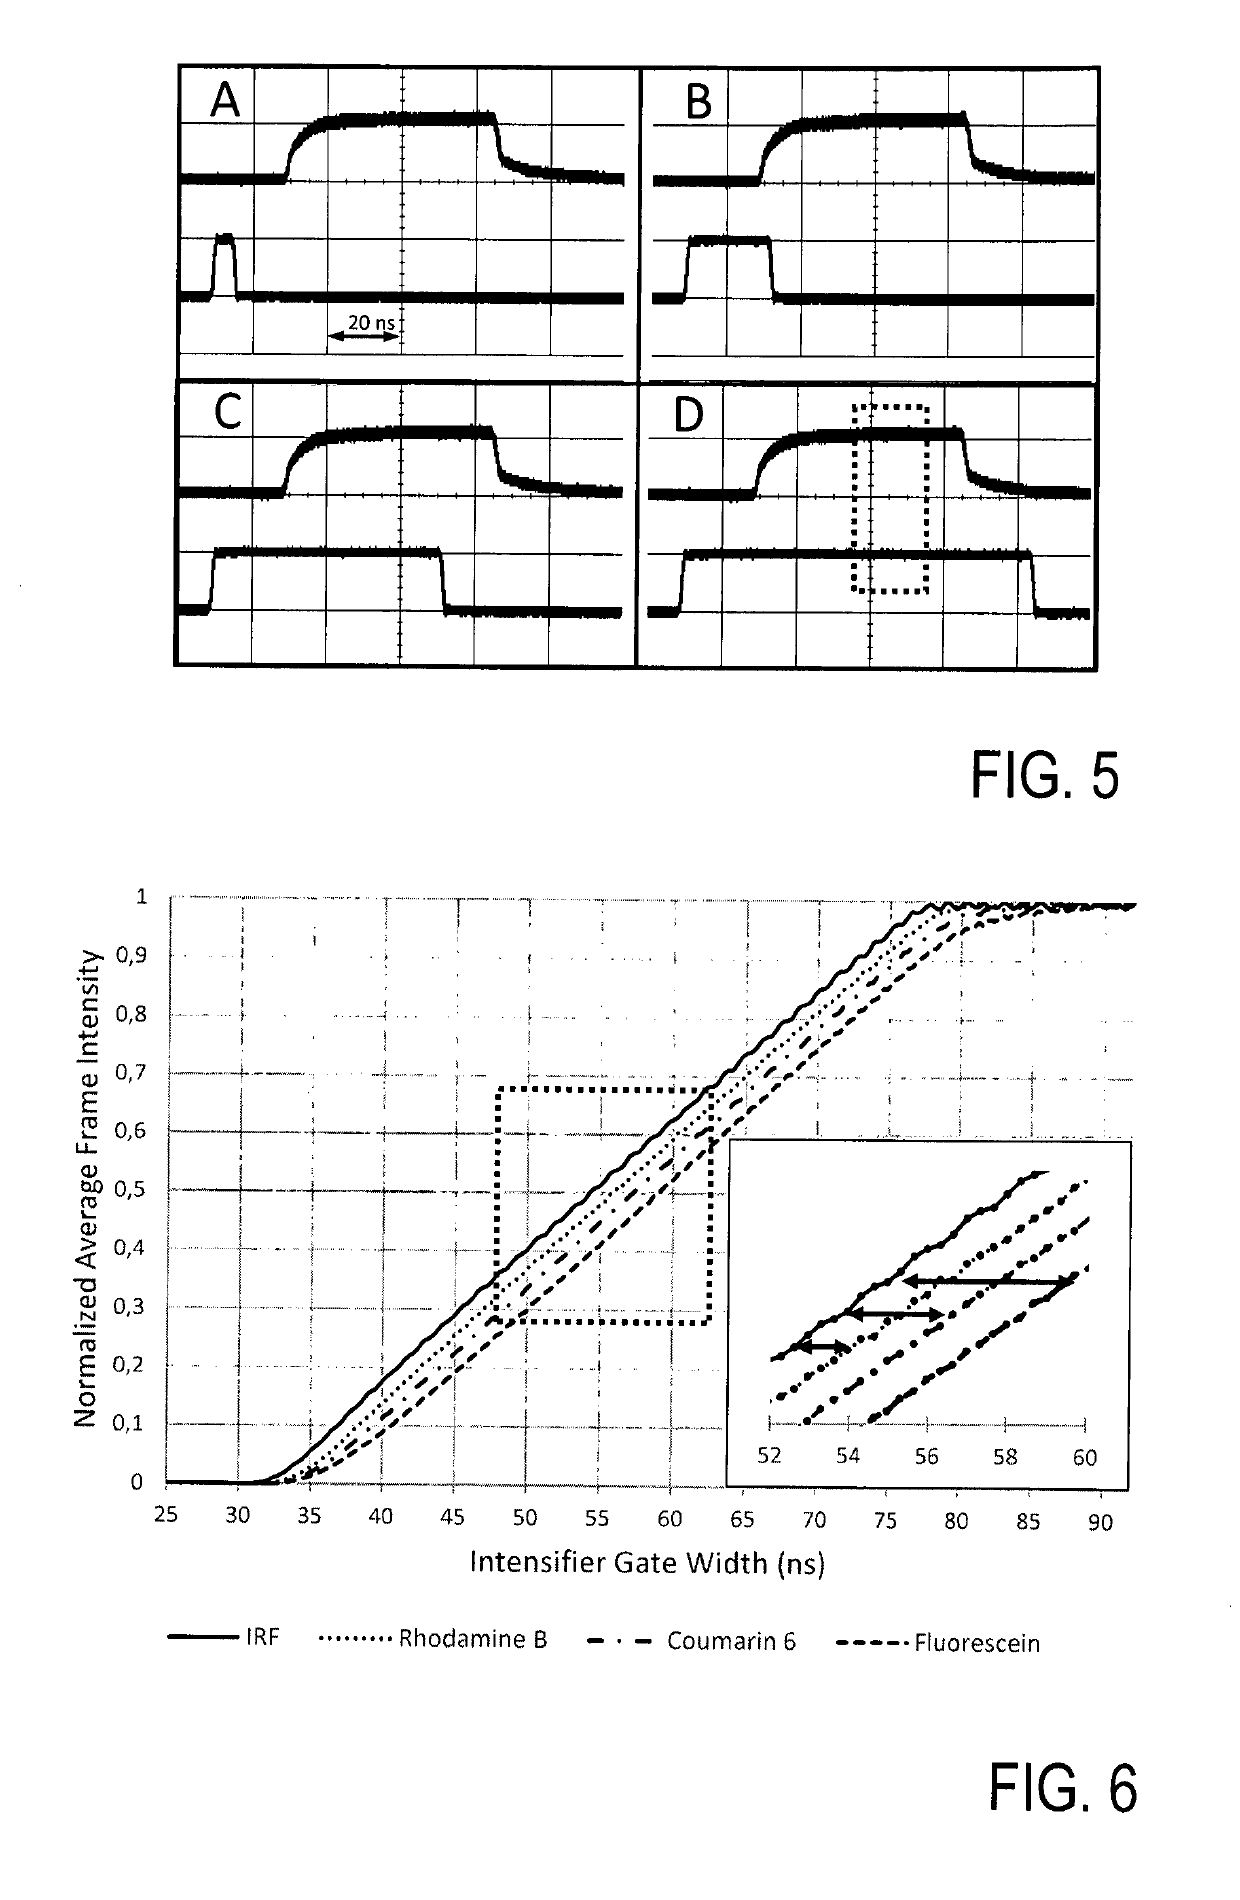 Emission lifetime measuring method and apparatus for measuring a mean lifetime of electronically excited states